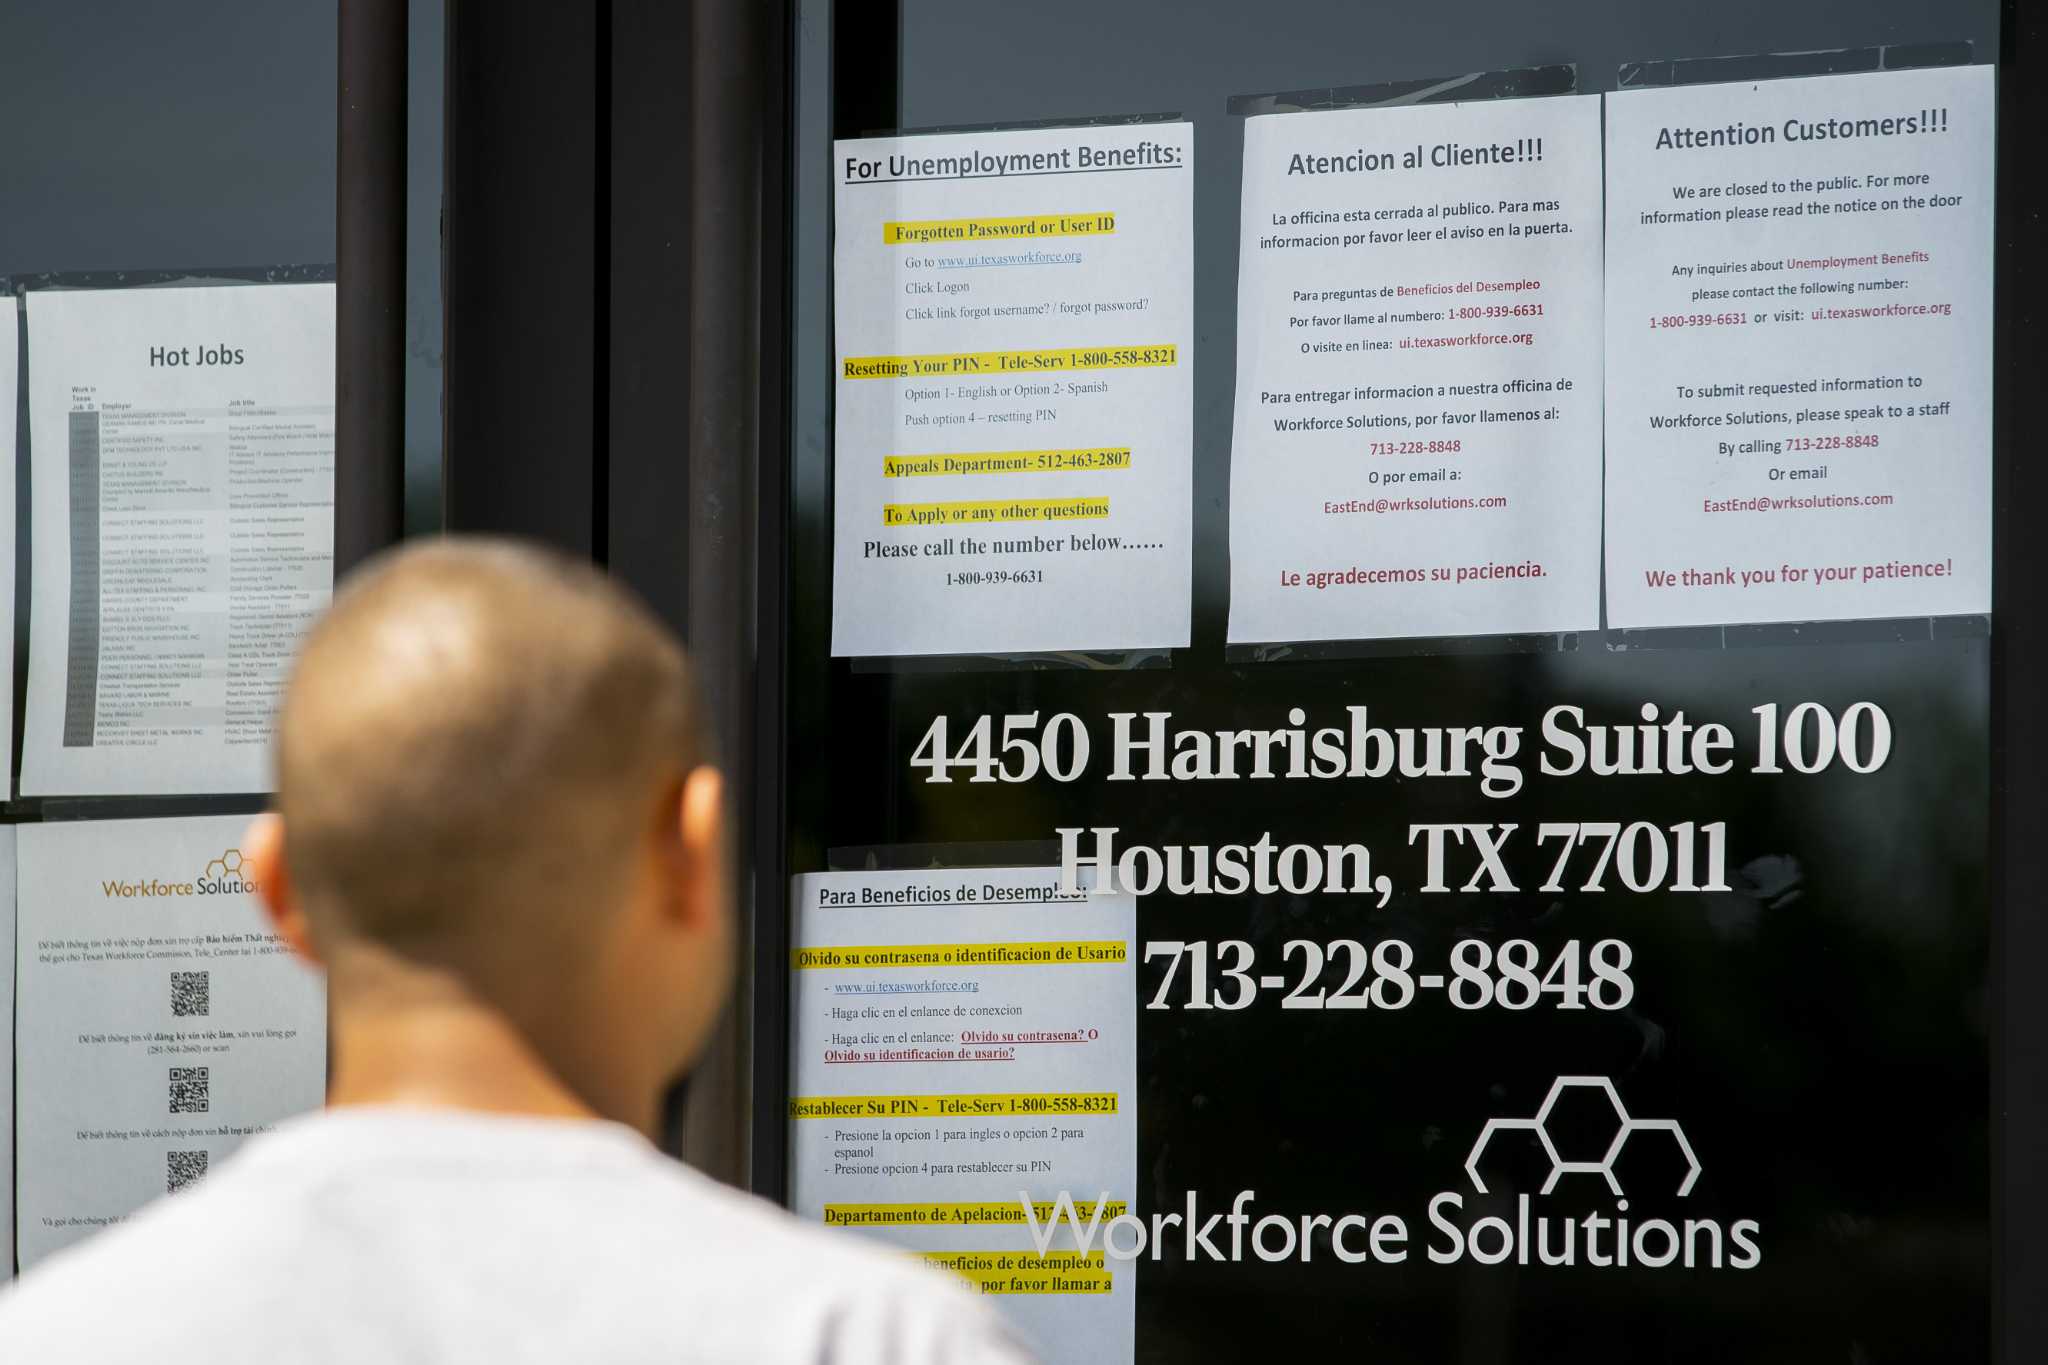 Texas Workforce Commission investigations for unemployment fraud  skyrocketed in 2020